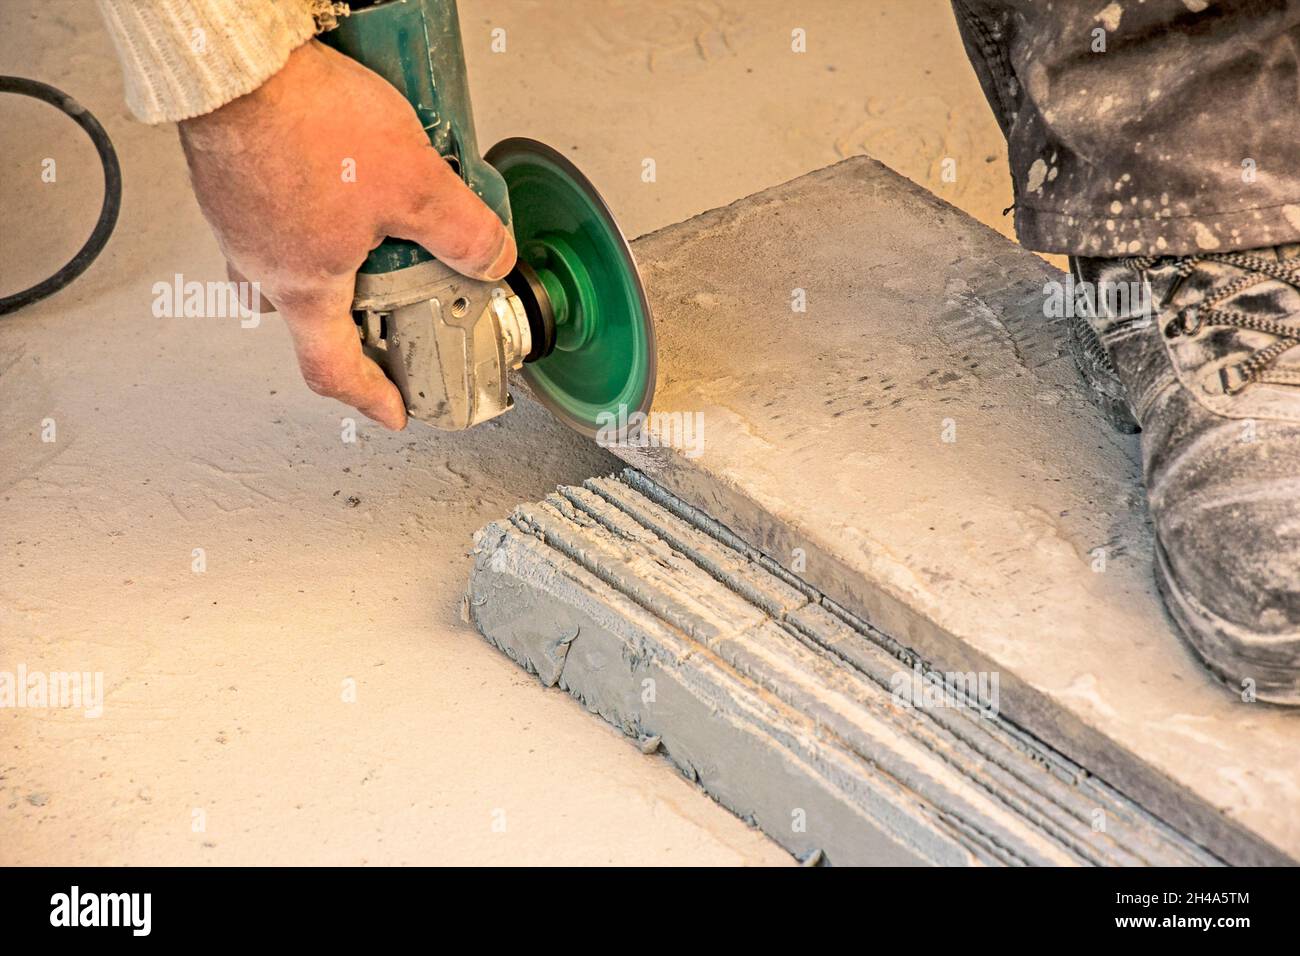 Make a Granite Knife with an Angle Grinder 